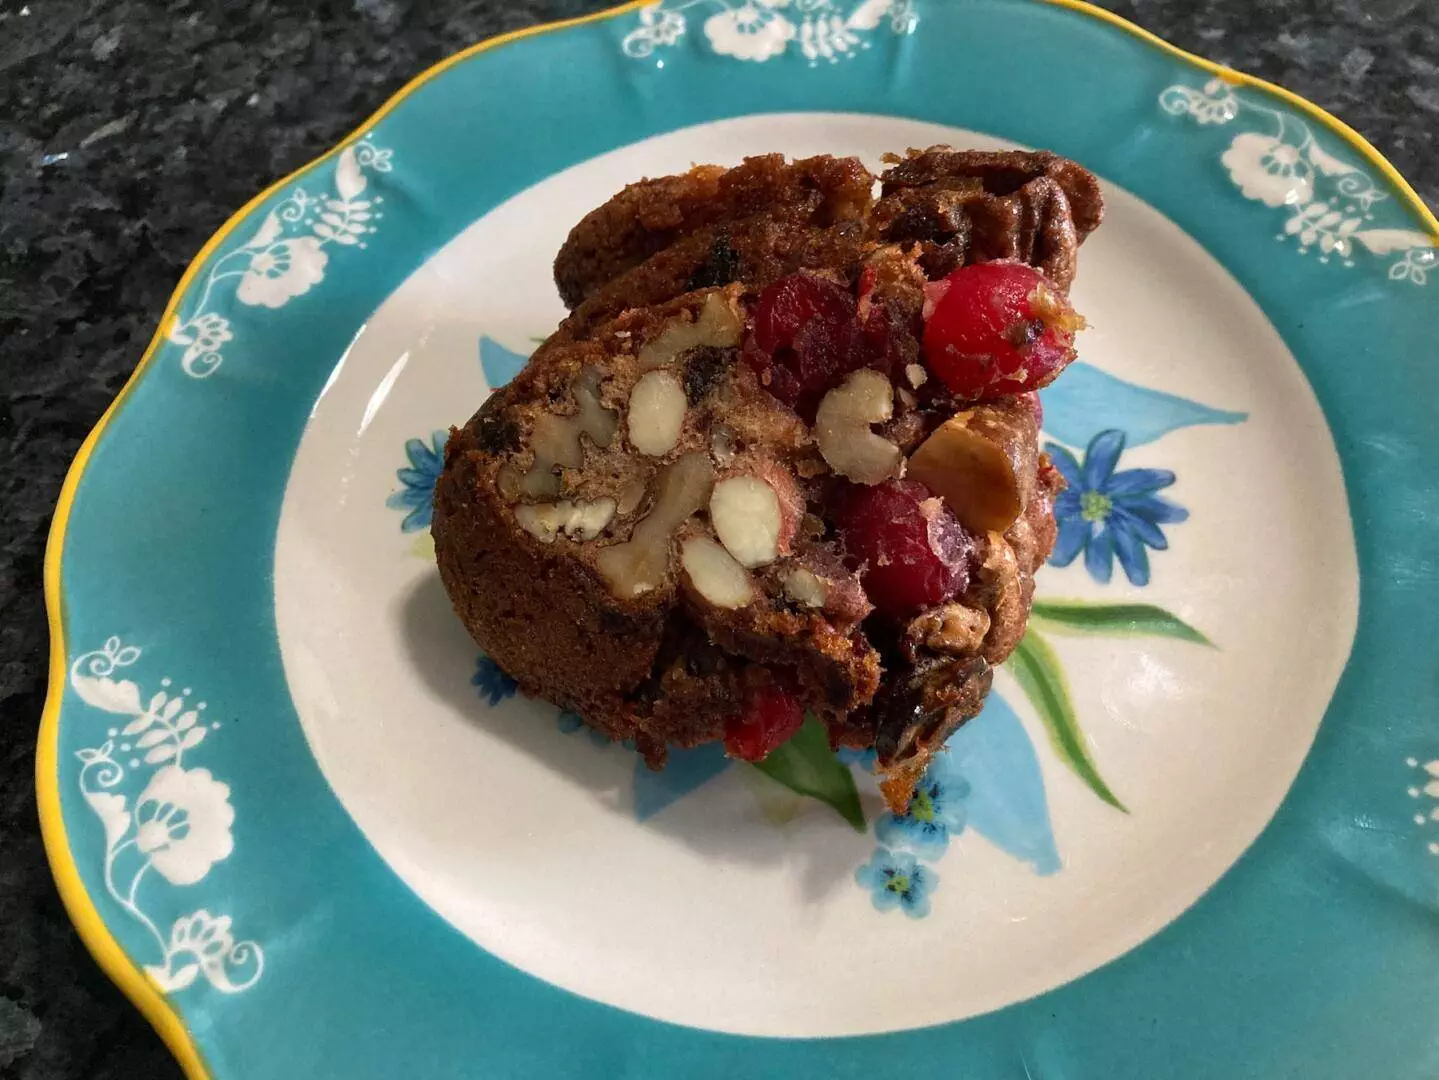 Festive Fruitcake from Out of the Box Baking.com